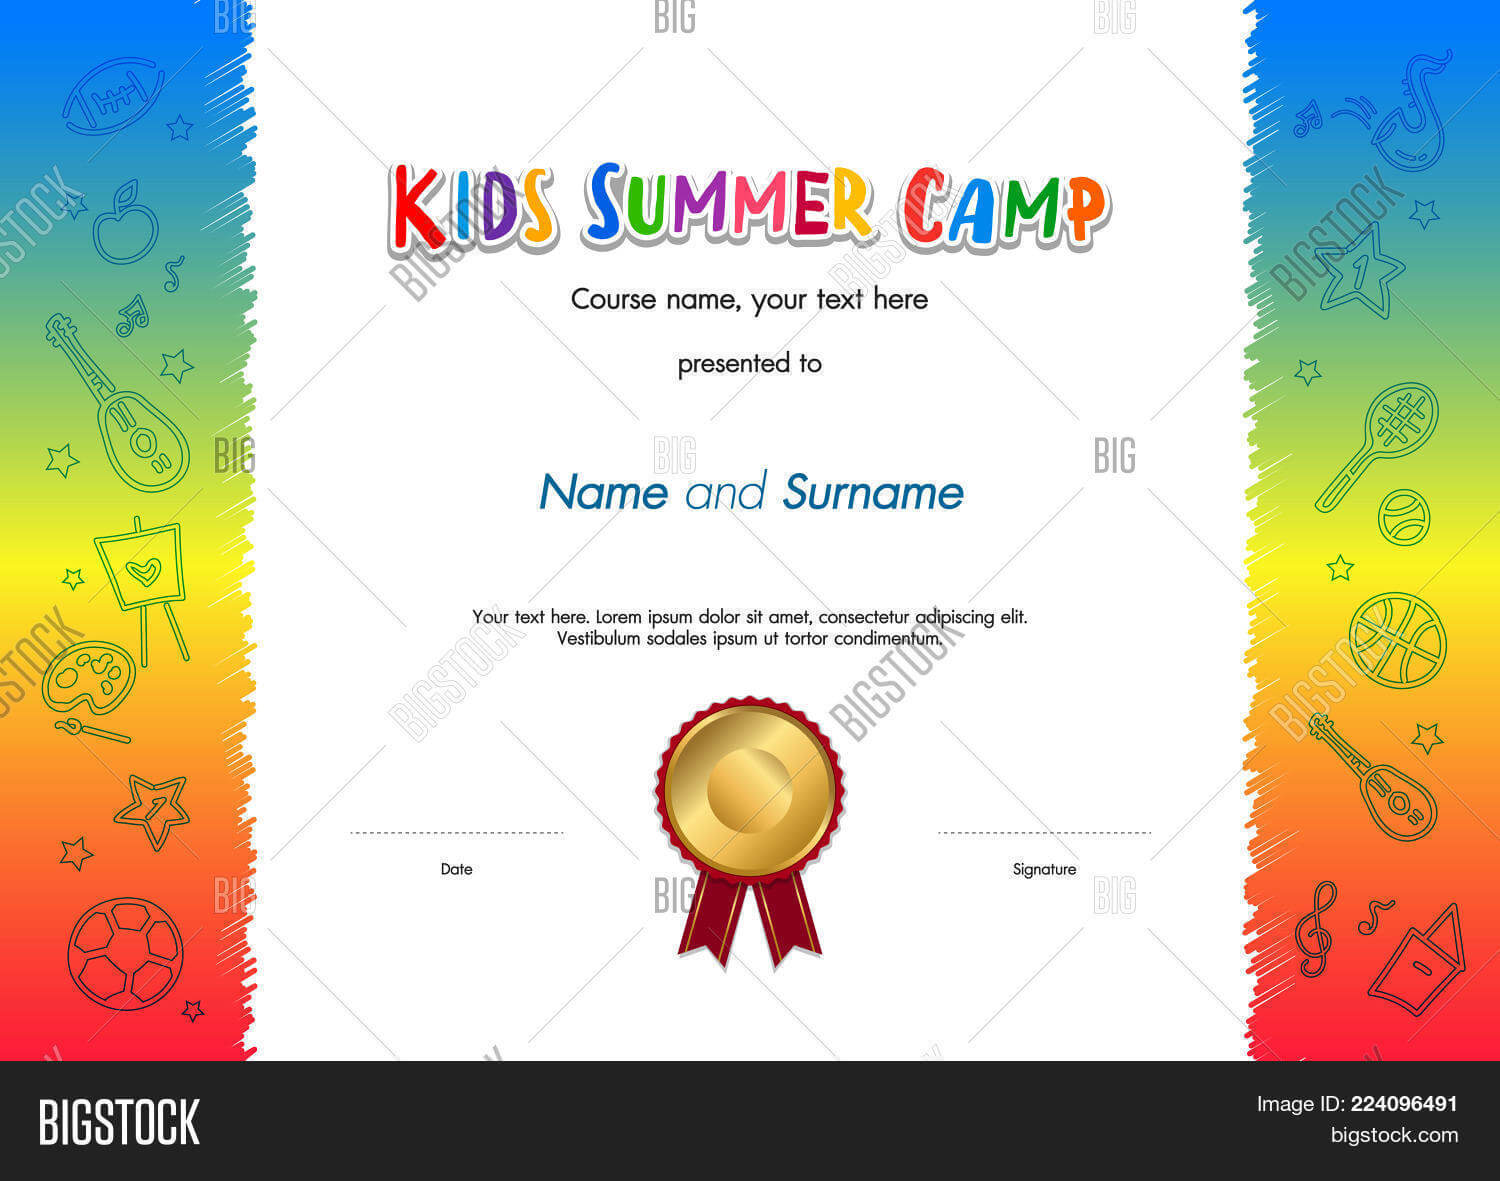 Kids Summer Camp Vector & Photo (Free Trial) | Bigstock Pertaining To Fun Certificate Templates